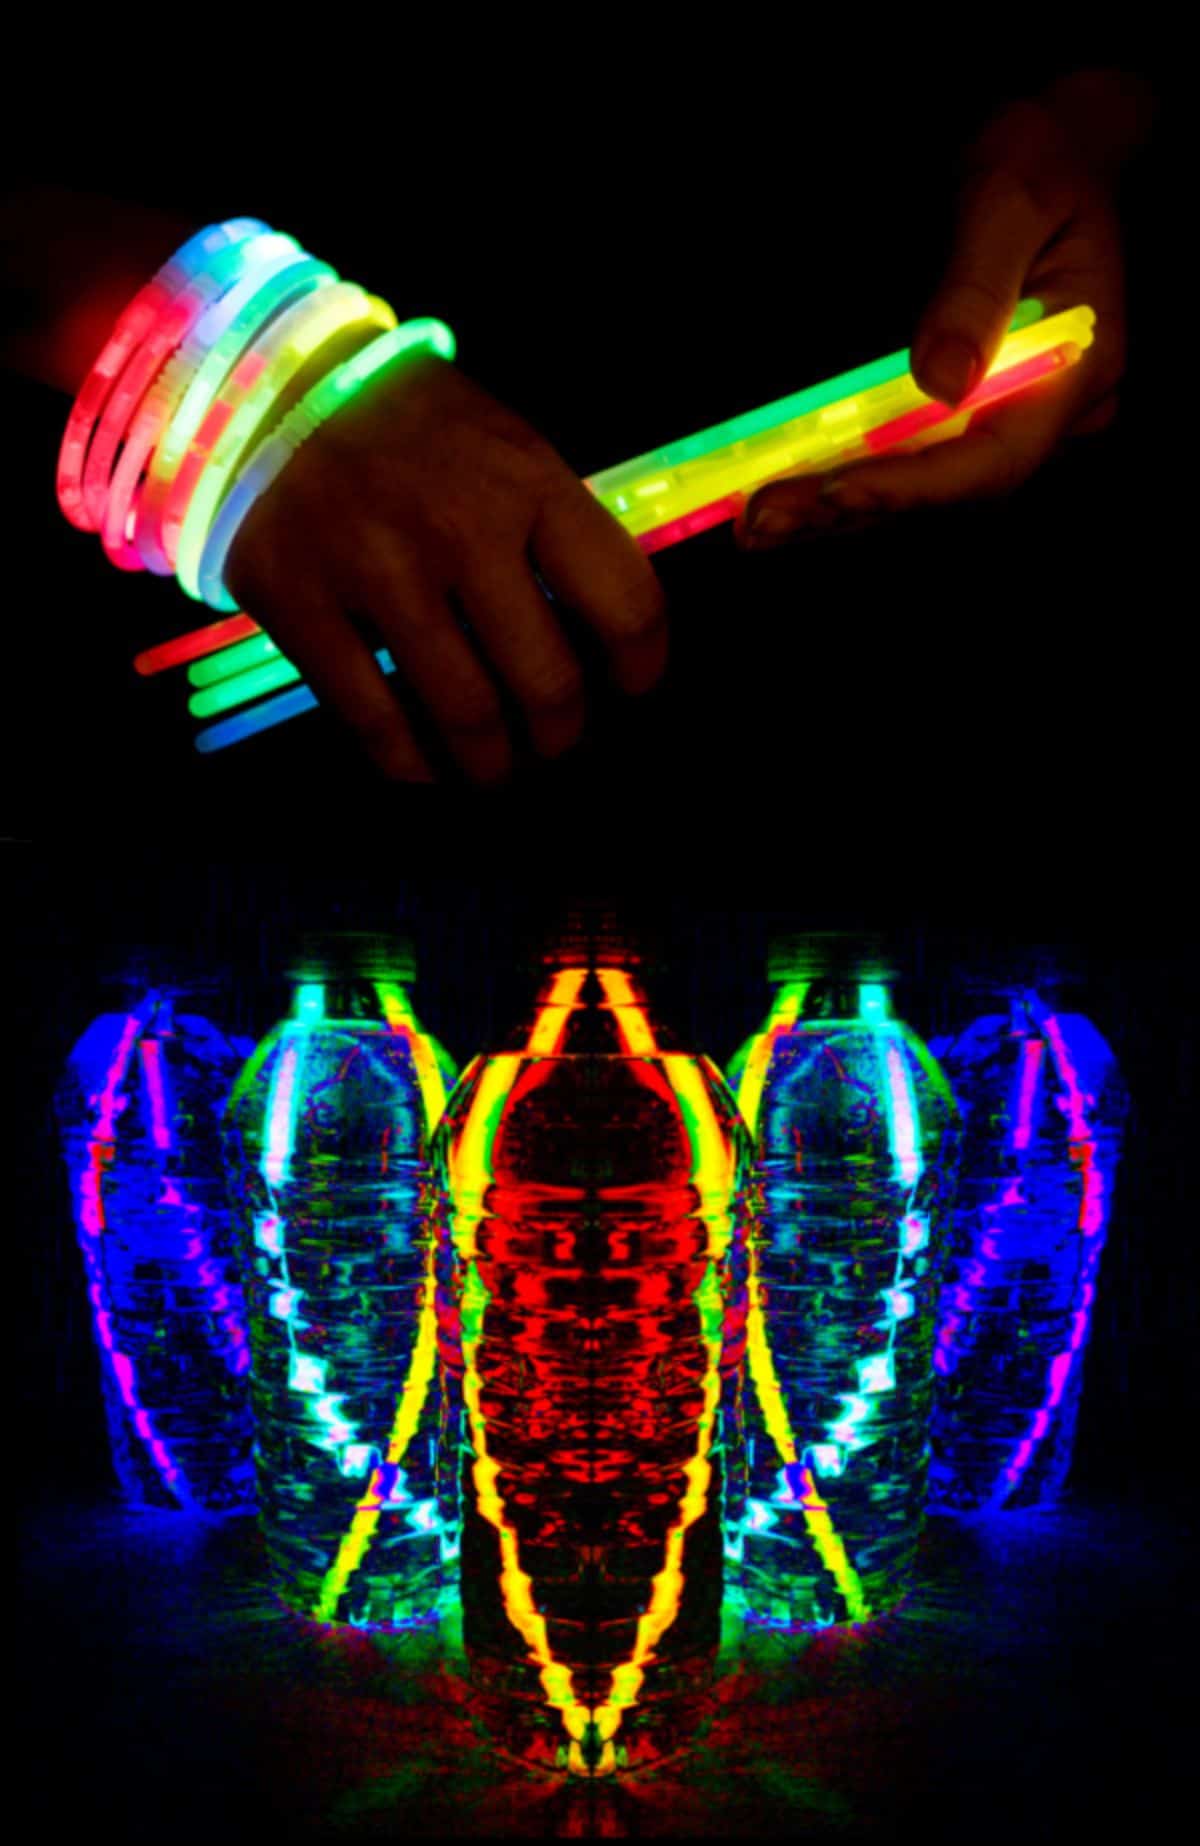 on a black background are 5 colored bottles with glow sticks in them. Two hands can be seen holding glow sticks with some wrapped around their wrist